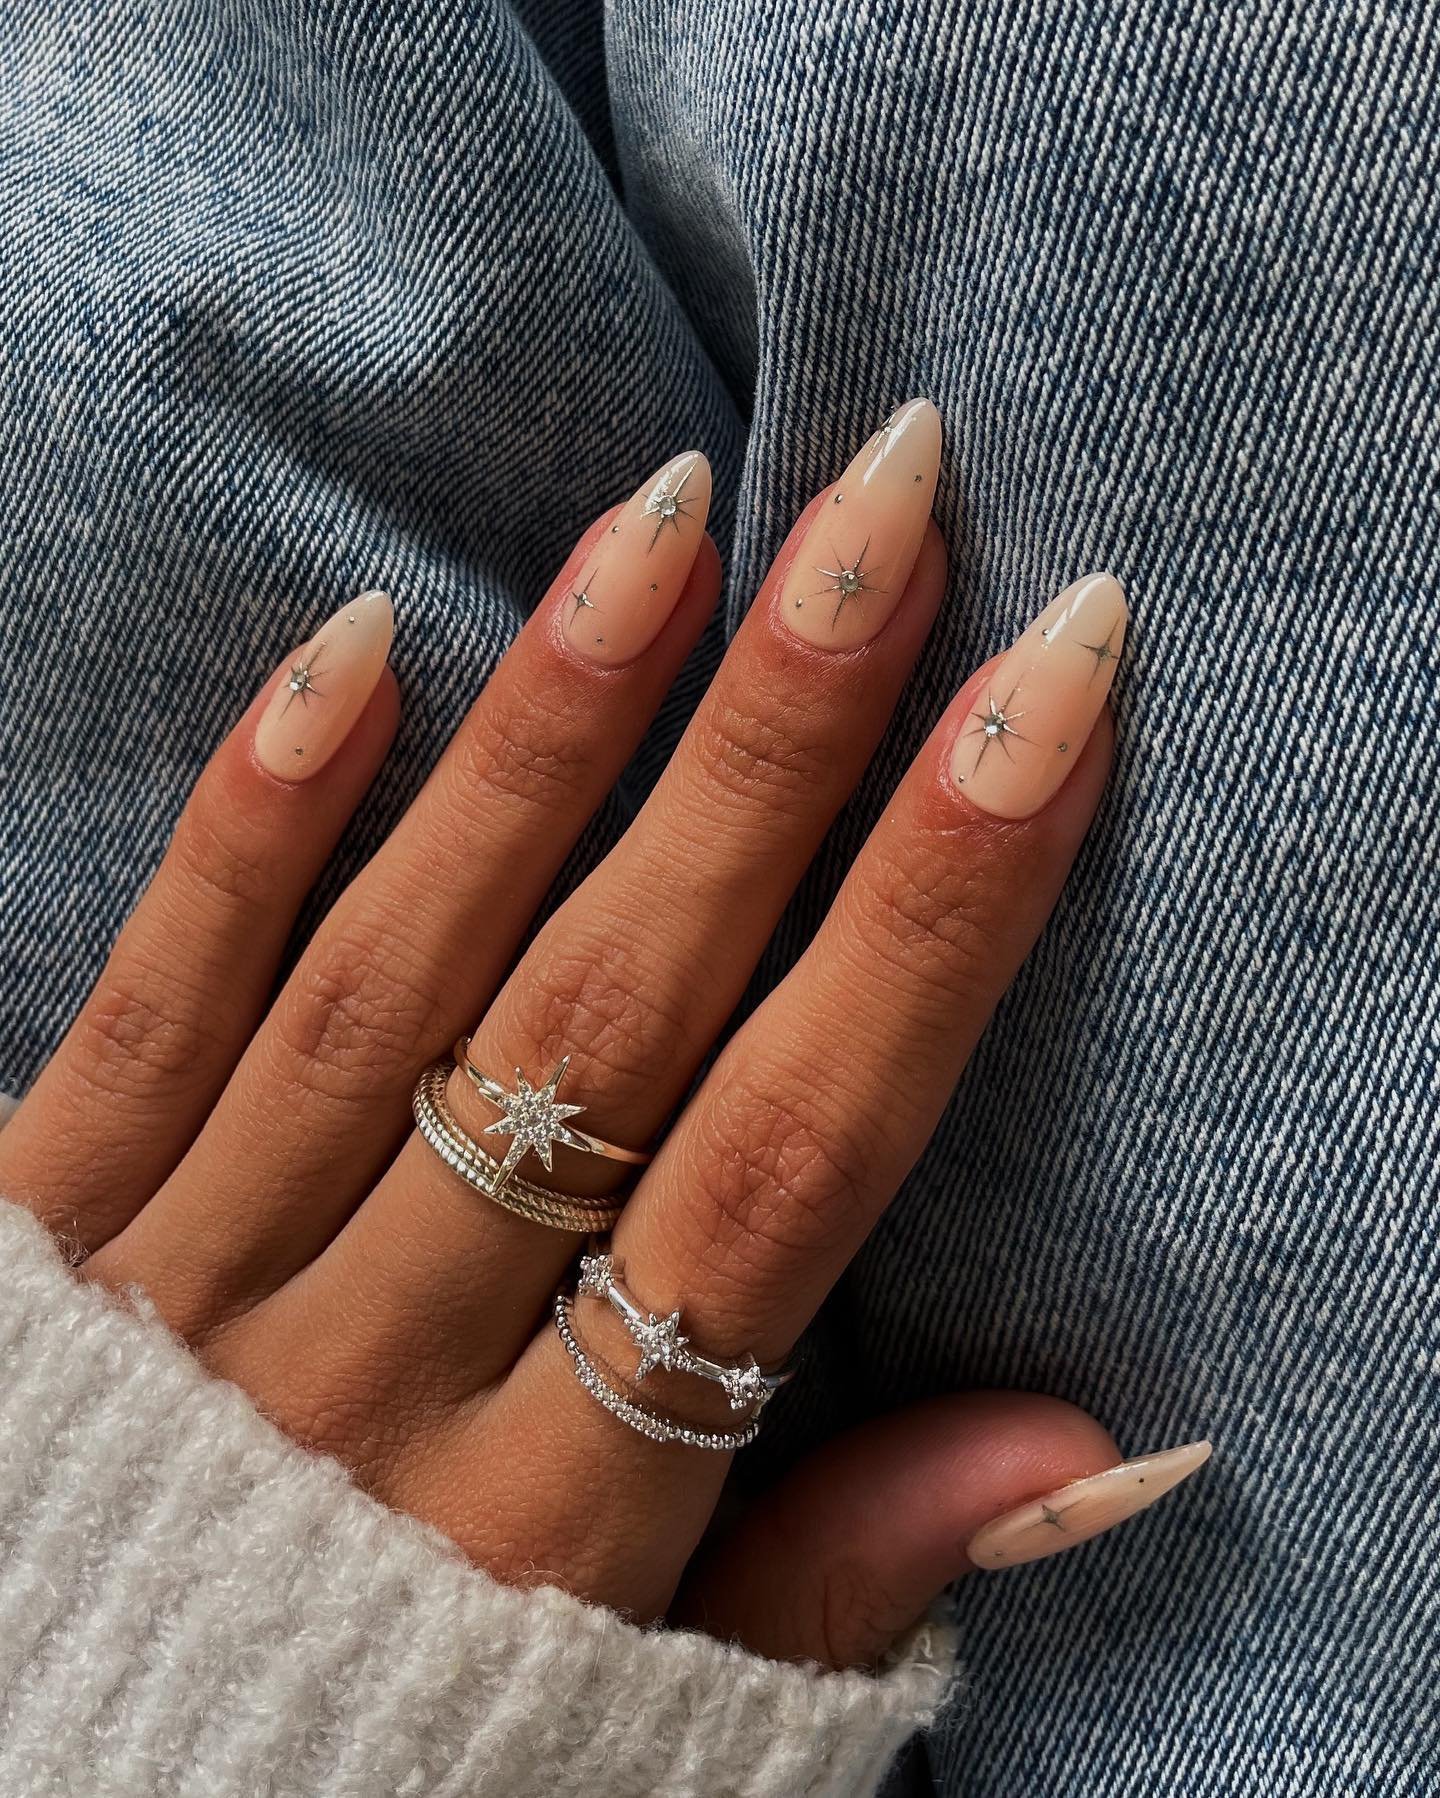 39 - Picture of Almond Nails